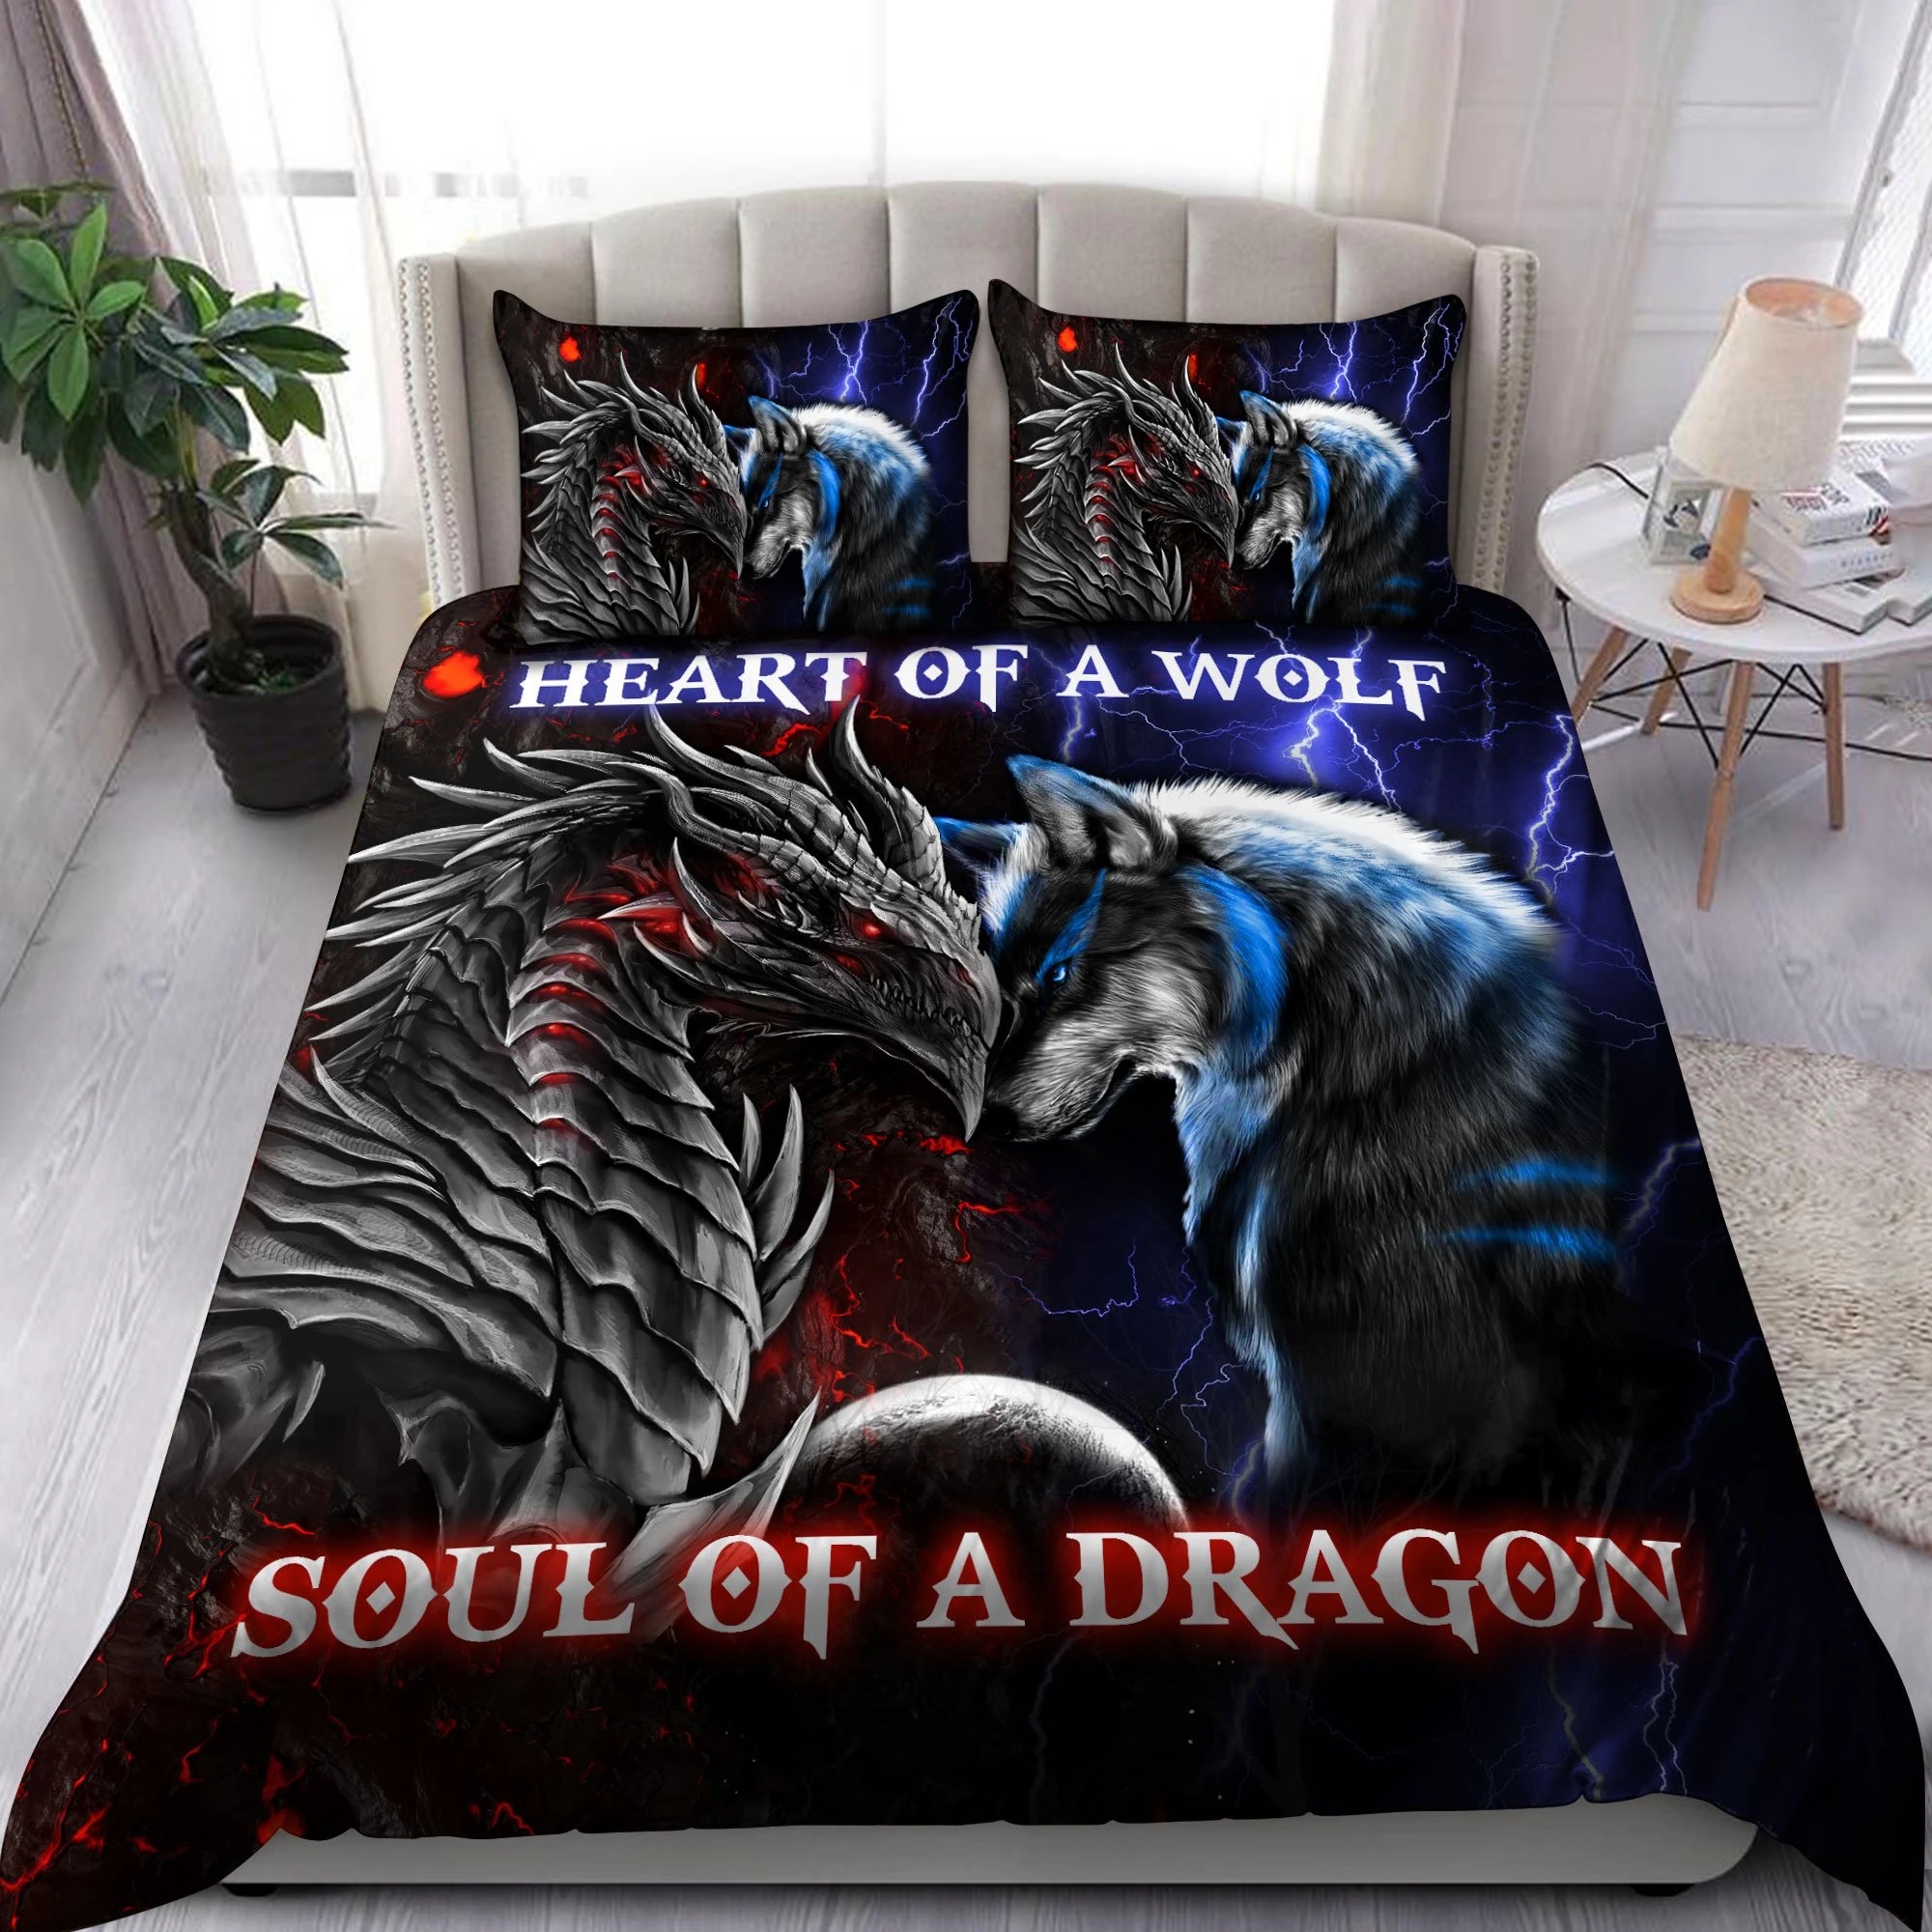 Heart of a wolf soul of a dragon bedding set 2